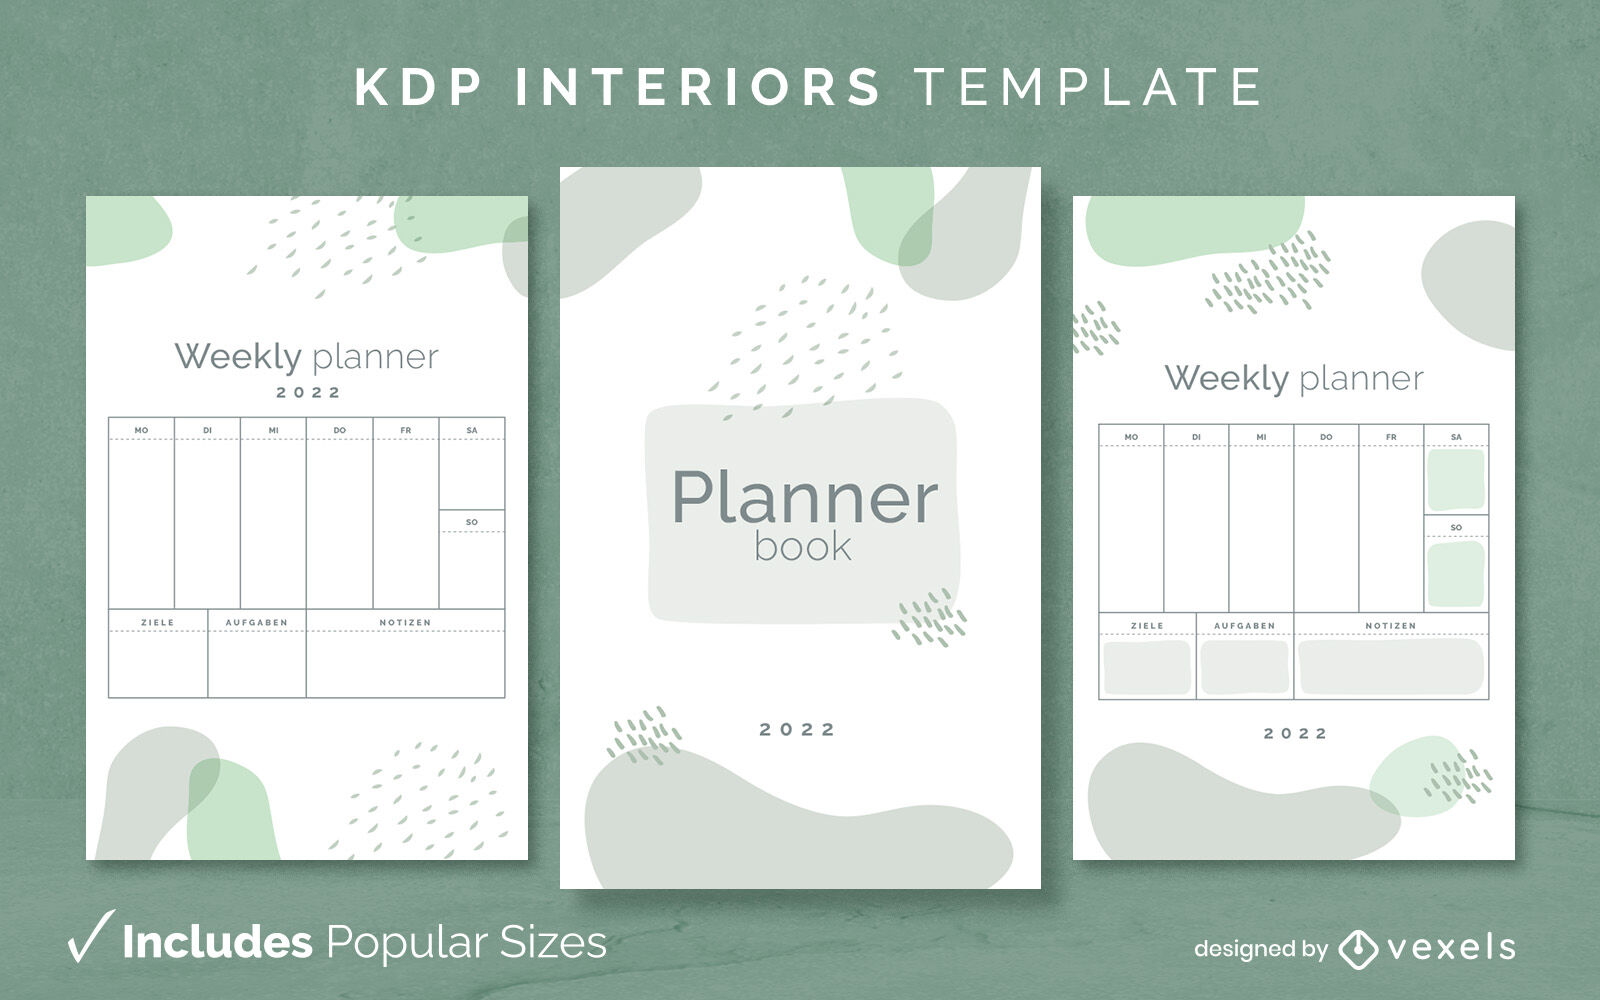 Abstract weekly planner design template KDP